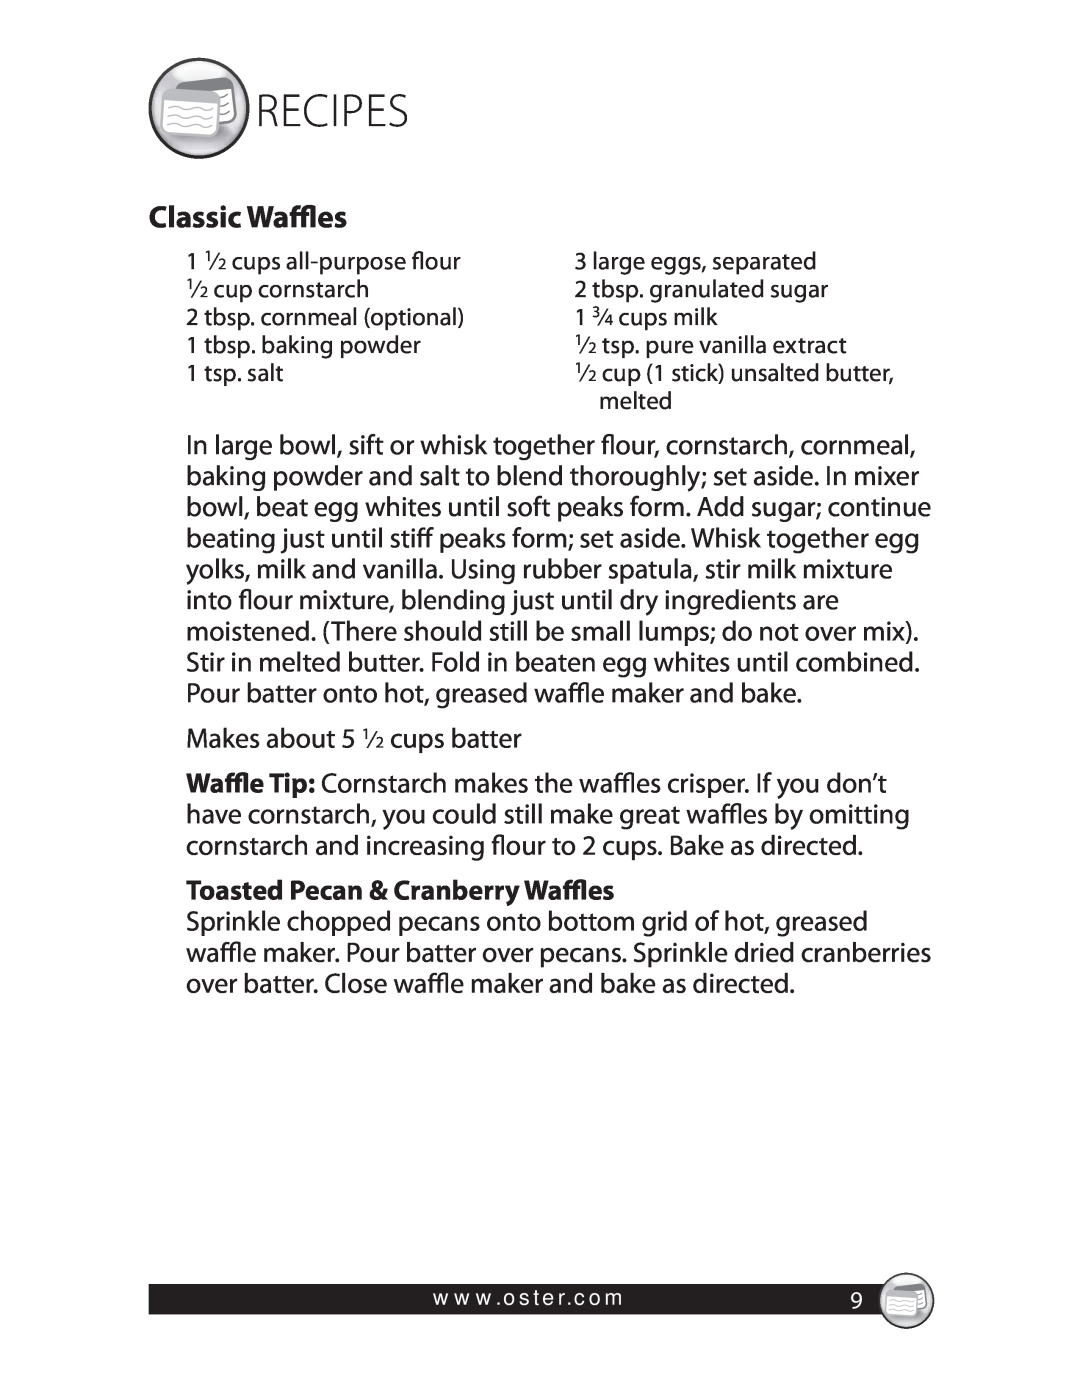 Oster CKSTWFBF20 warranty Recipes, Classic Waffles, Toasted Pecan & Cranberry Waffles 